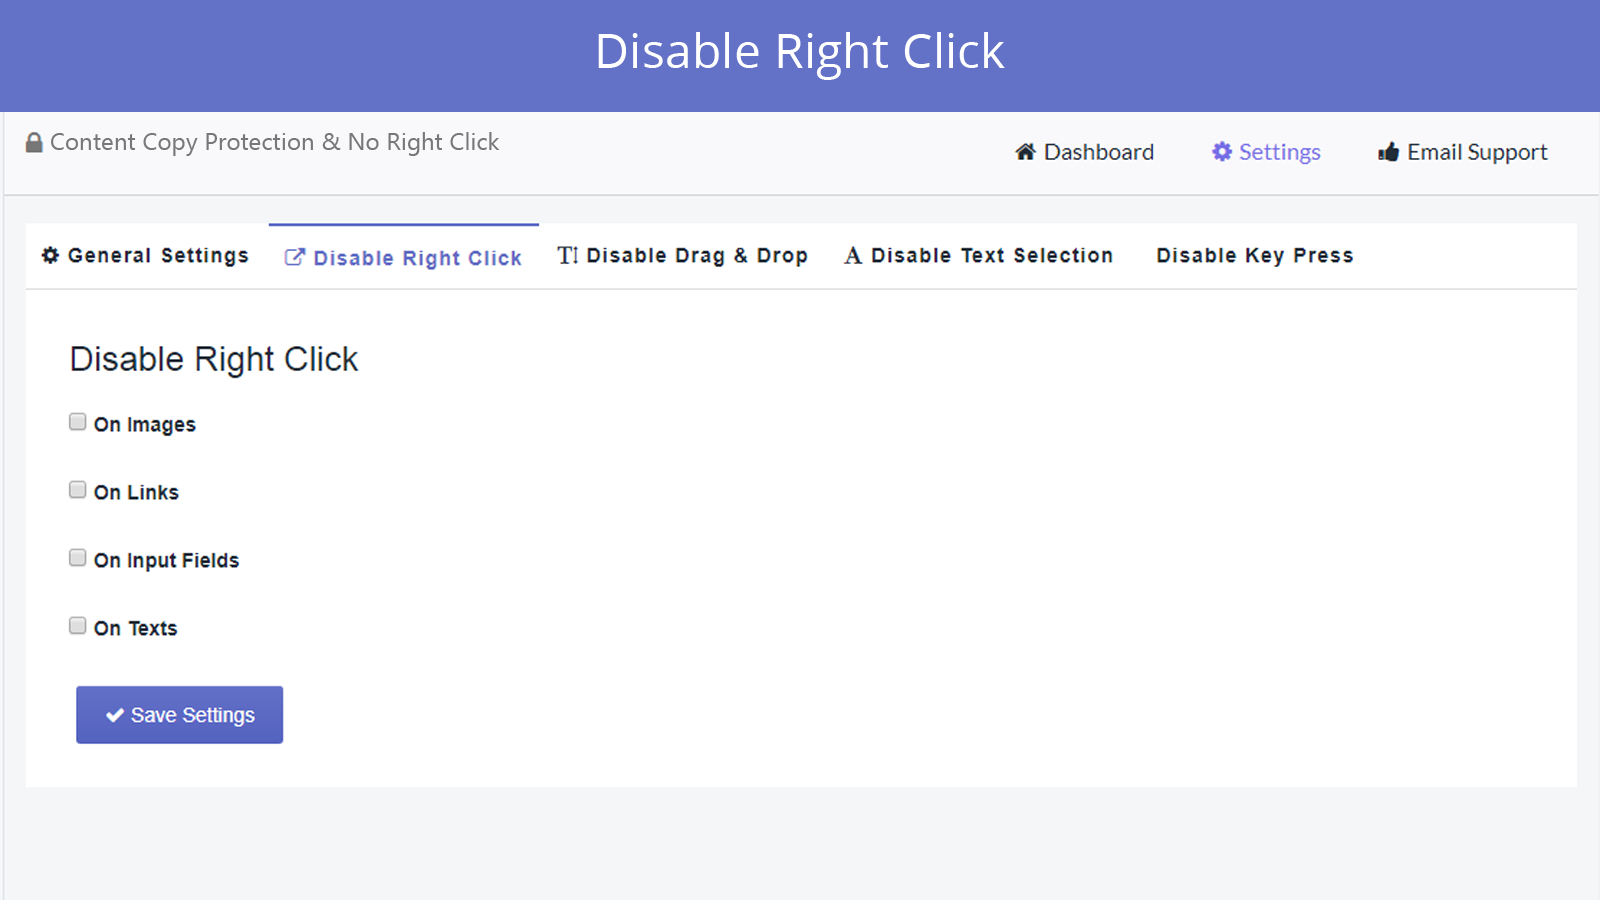 disable right click feature in smart right click disabler app